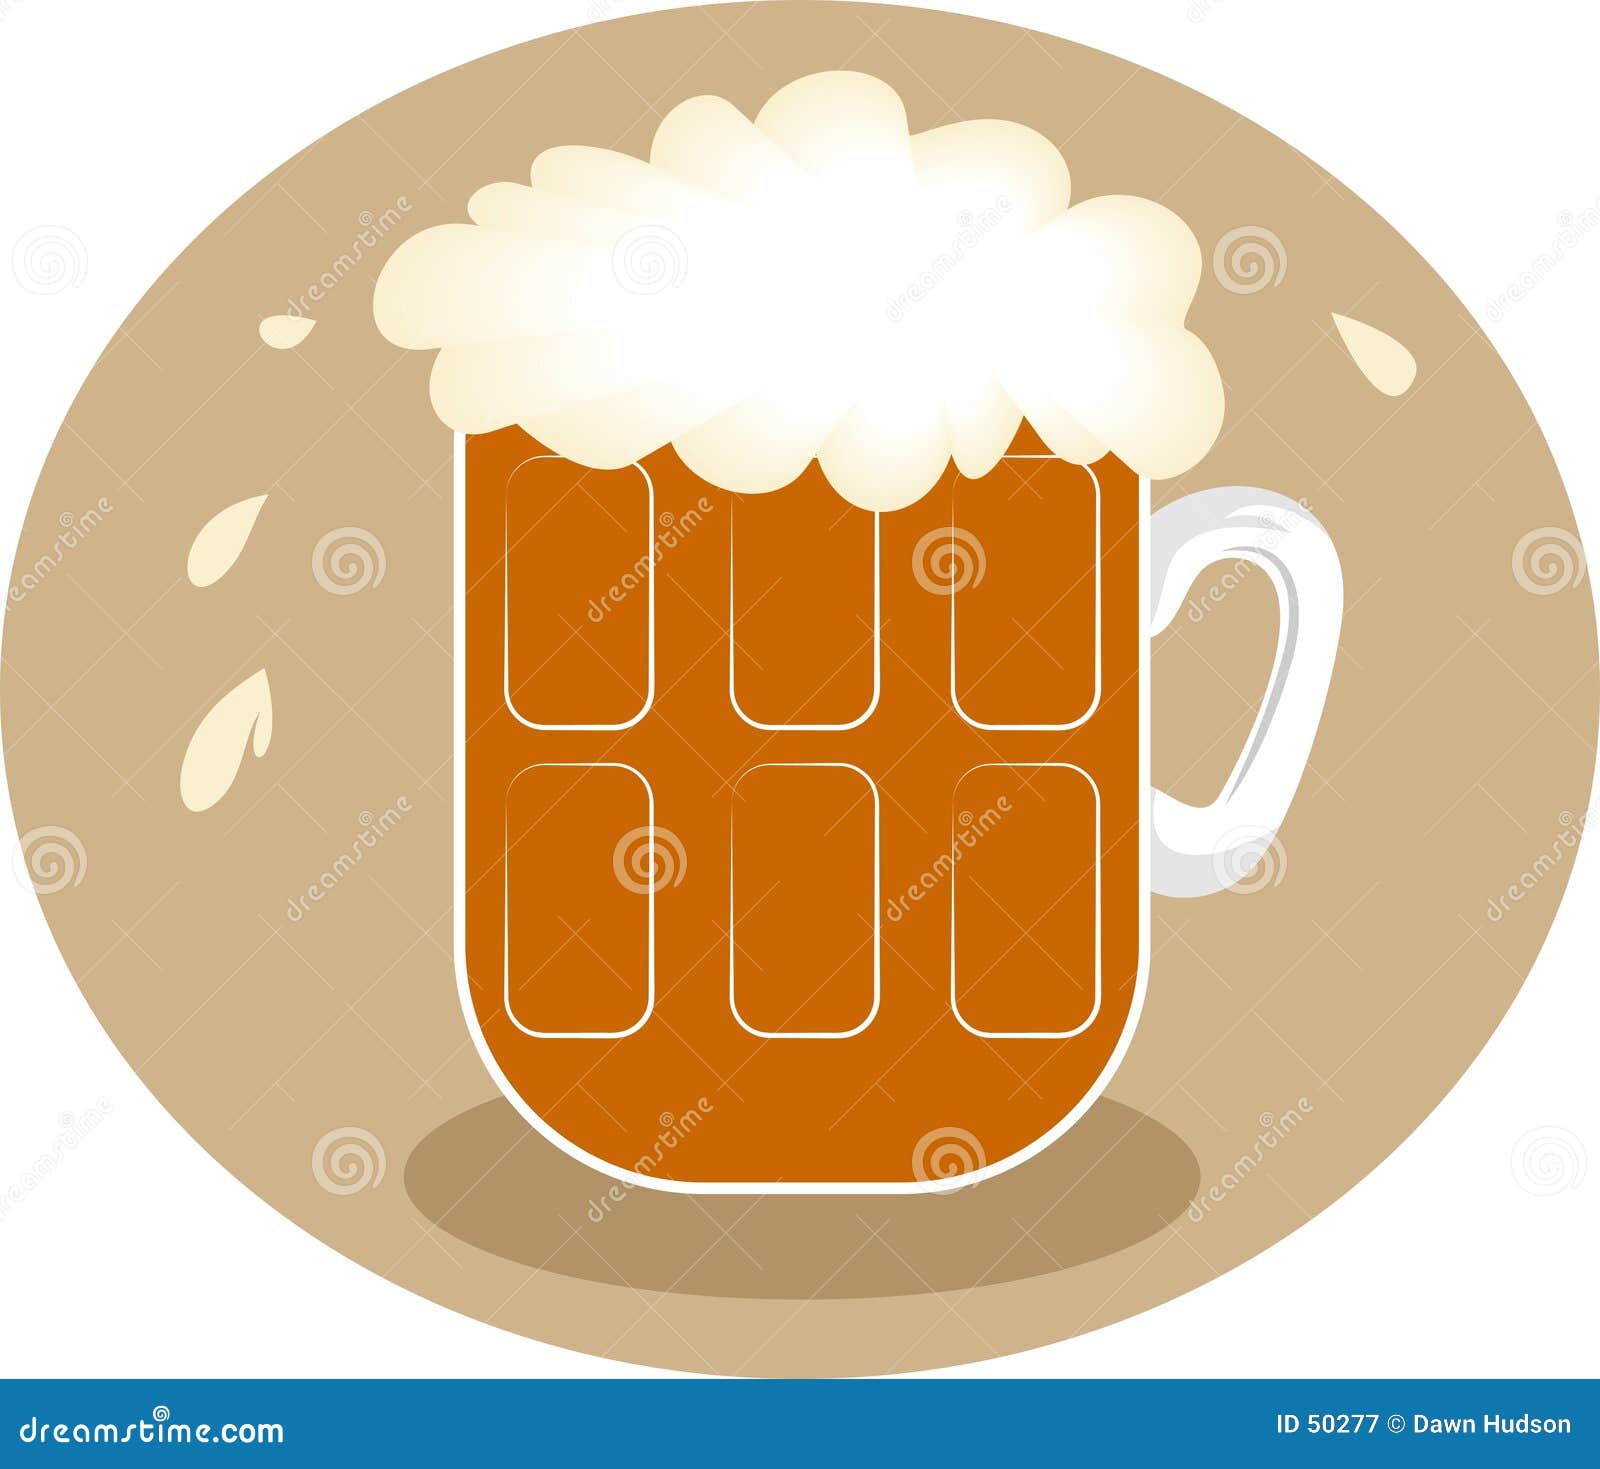 frothy beer